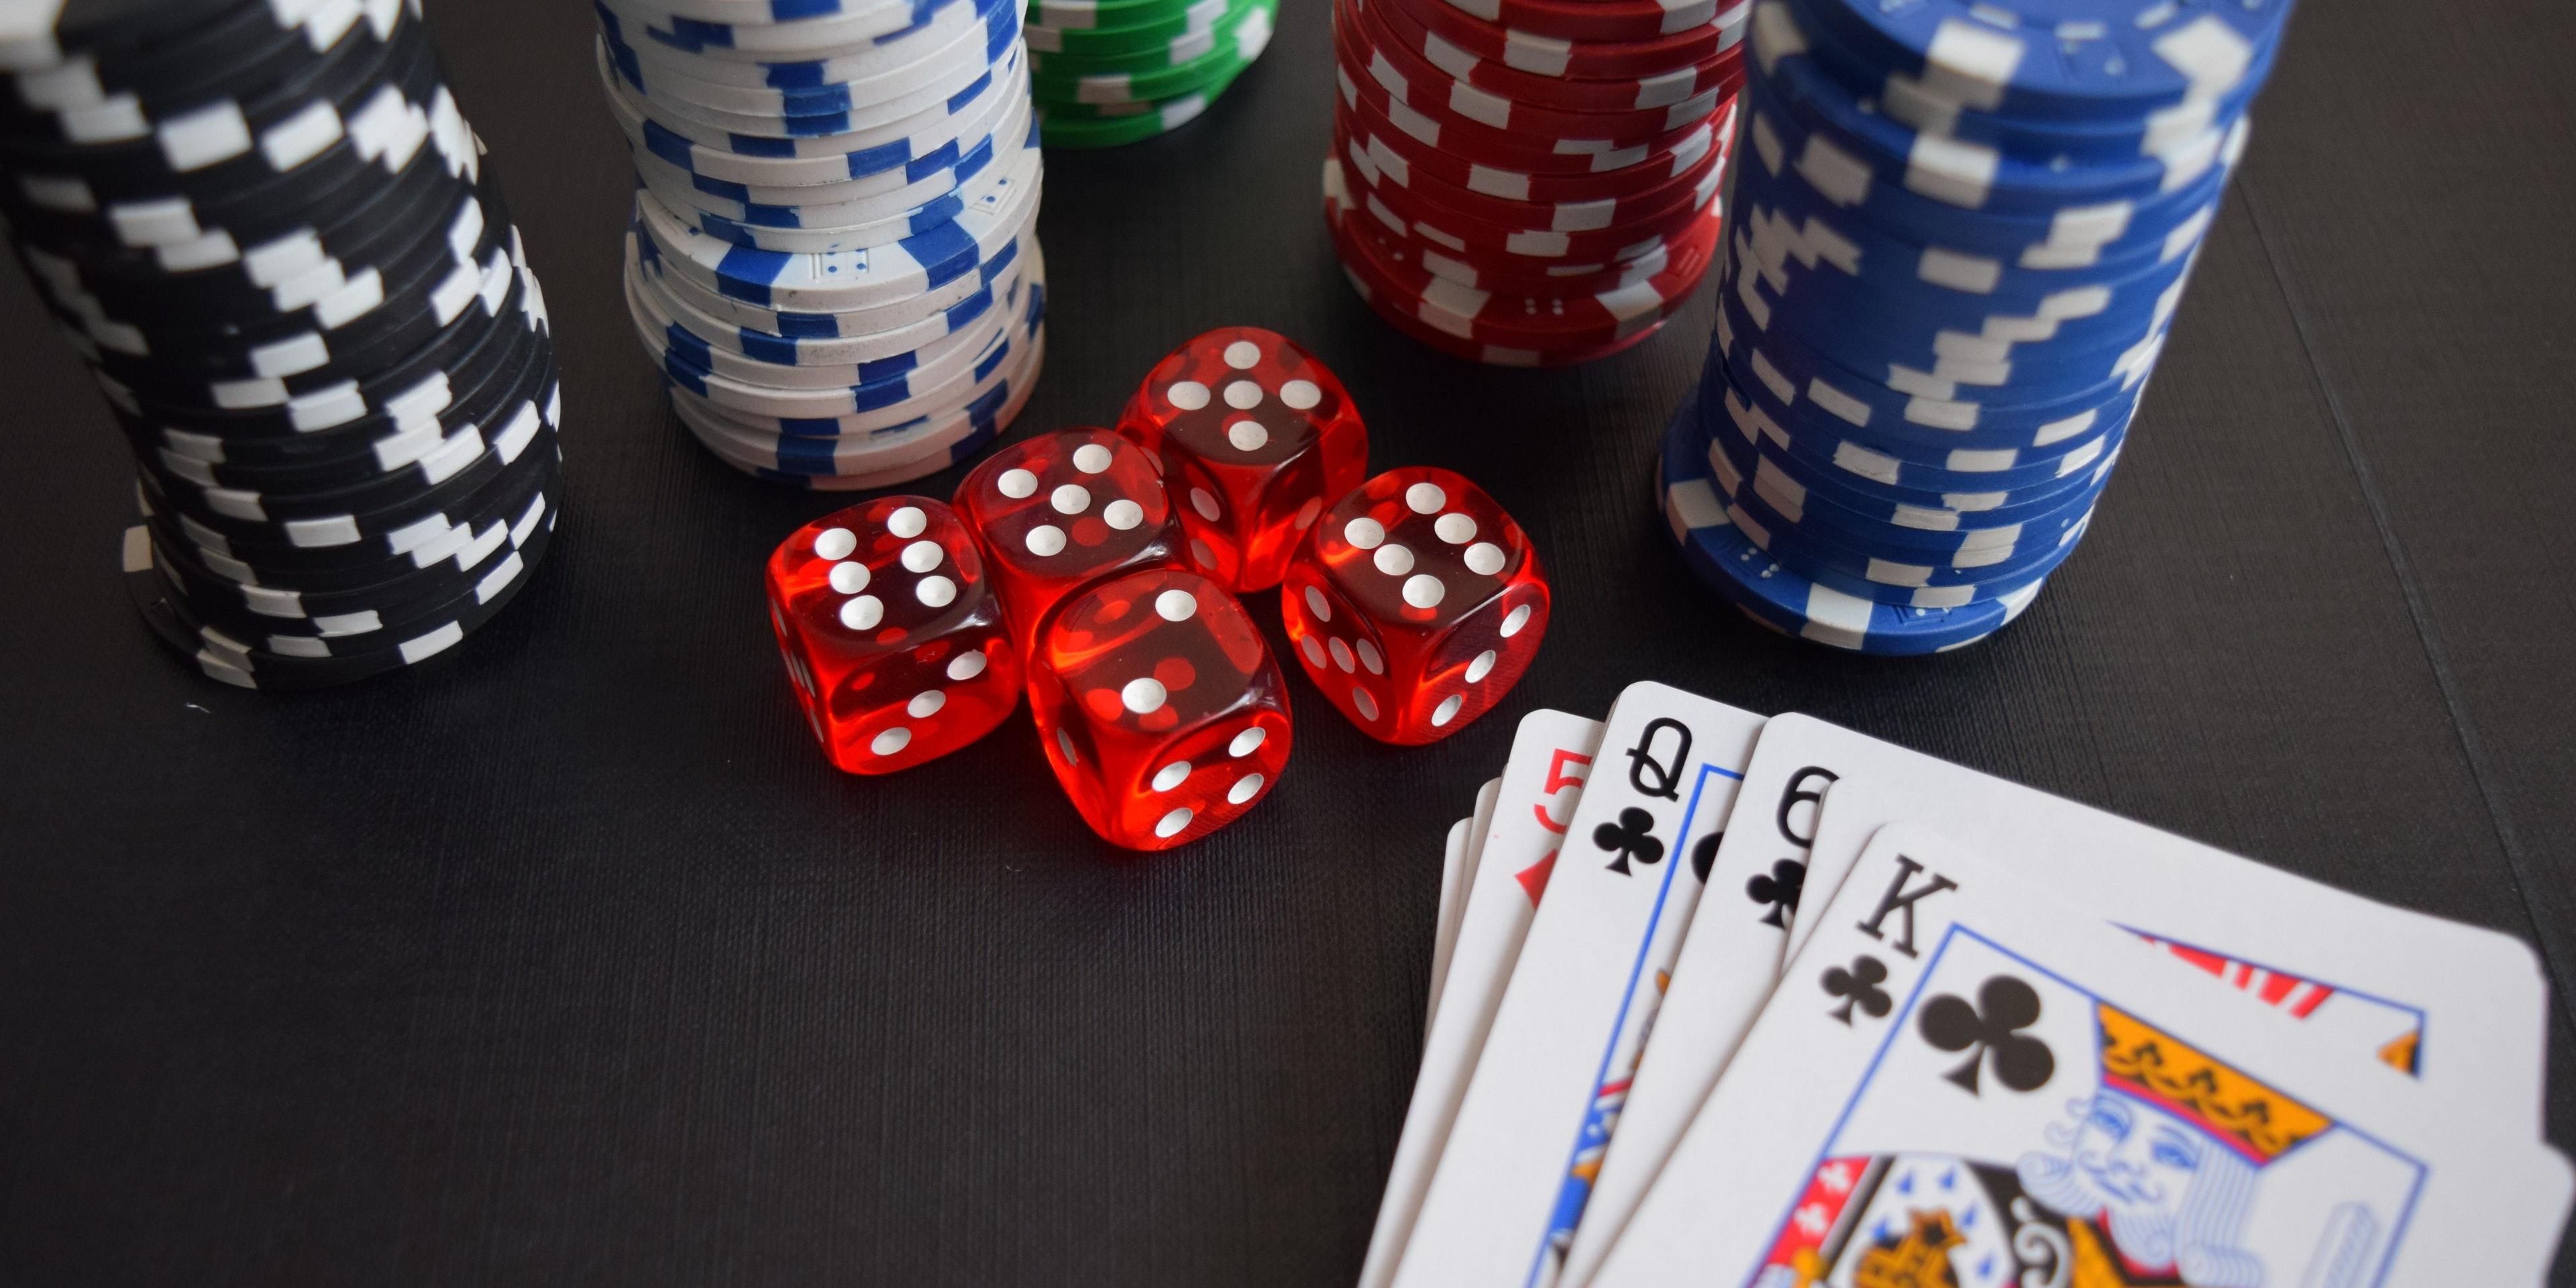 Feeling Lucky?  Gun Lake Casino is located less than 30 minutes from the hotel.